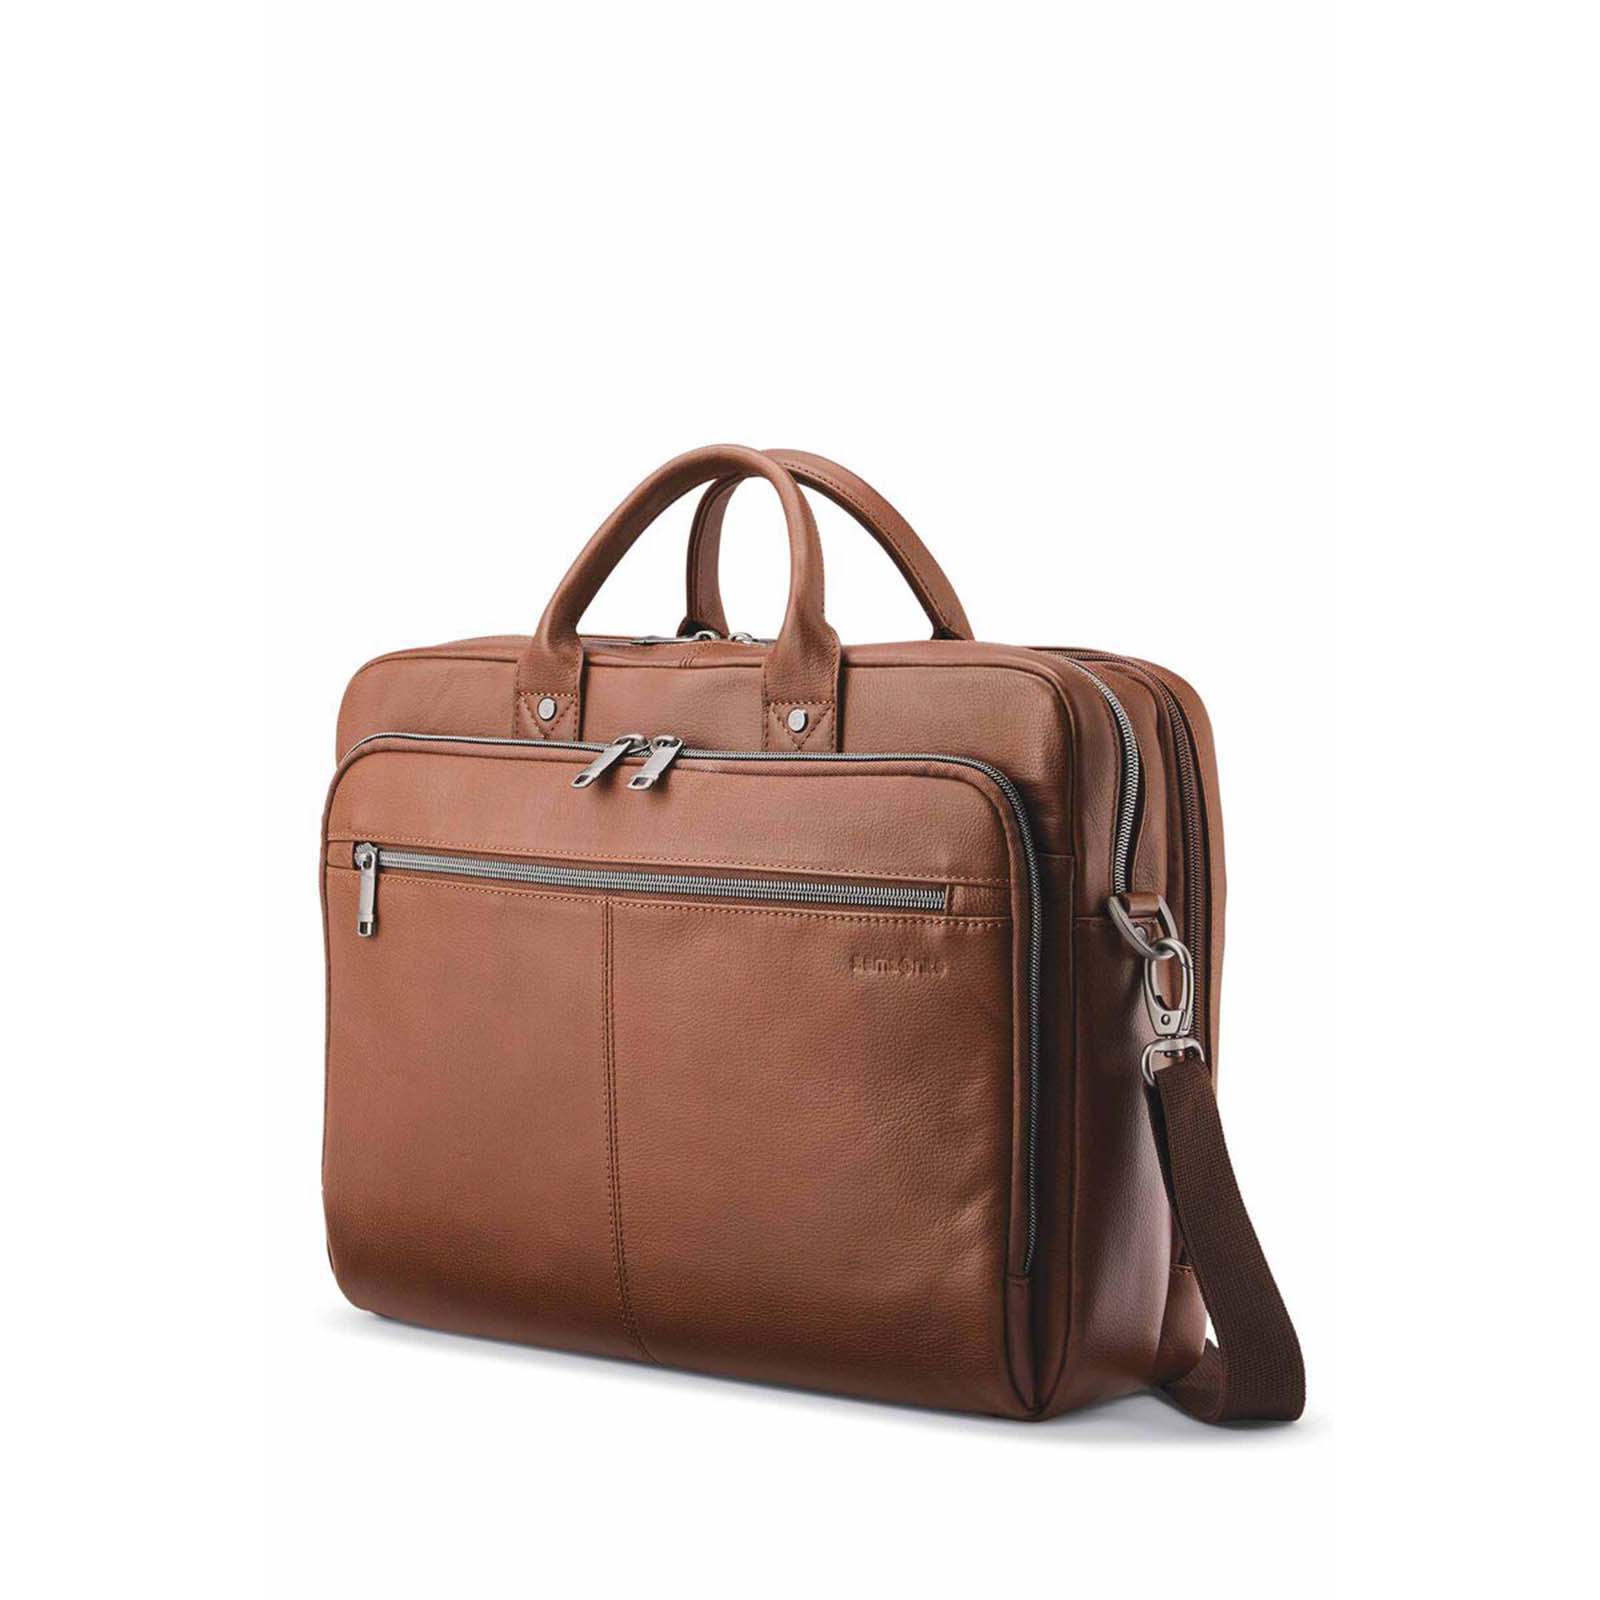 Samsonite-Classic-Leather-15-Inch-Top-Loader-Cognac-Front-Angle